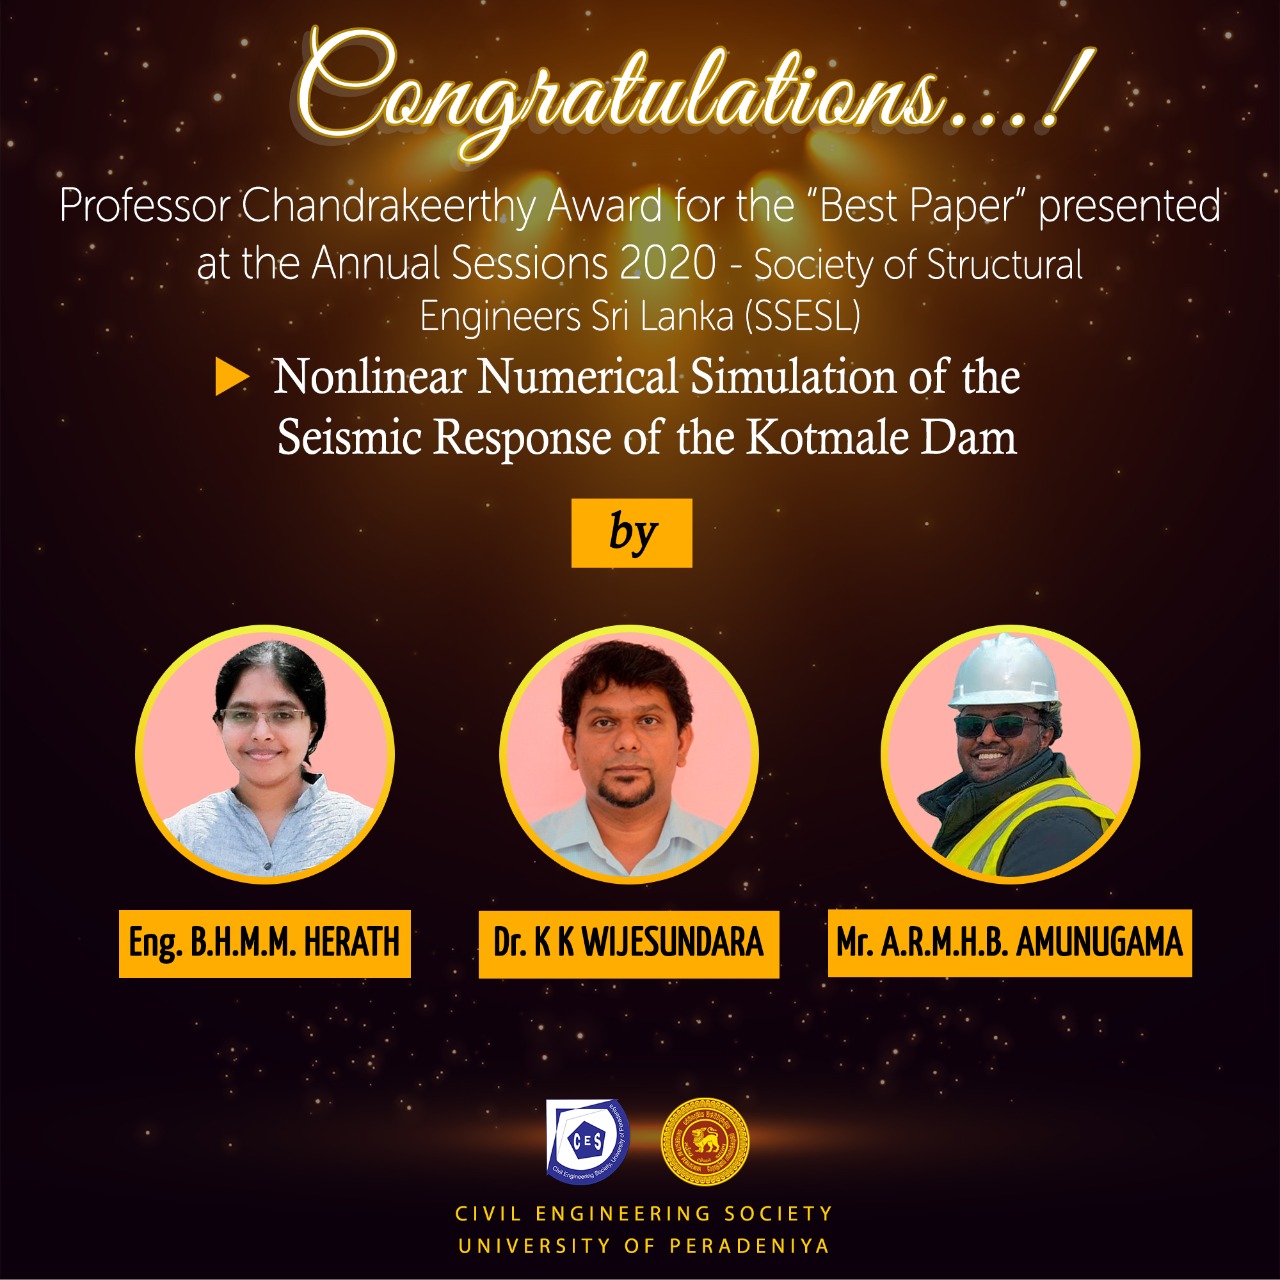 Eng. B.H.M.M. Herath, Dr.K.K. Wijesundara and Mr. A.R.M.H.B. Amunugama has won the Professor Chandrakeerthy Award for the “Best Paper” presented at the Annual Sessions 2020